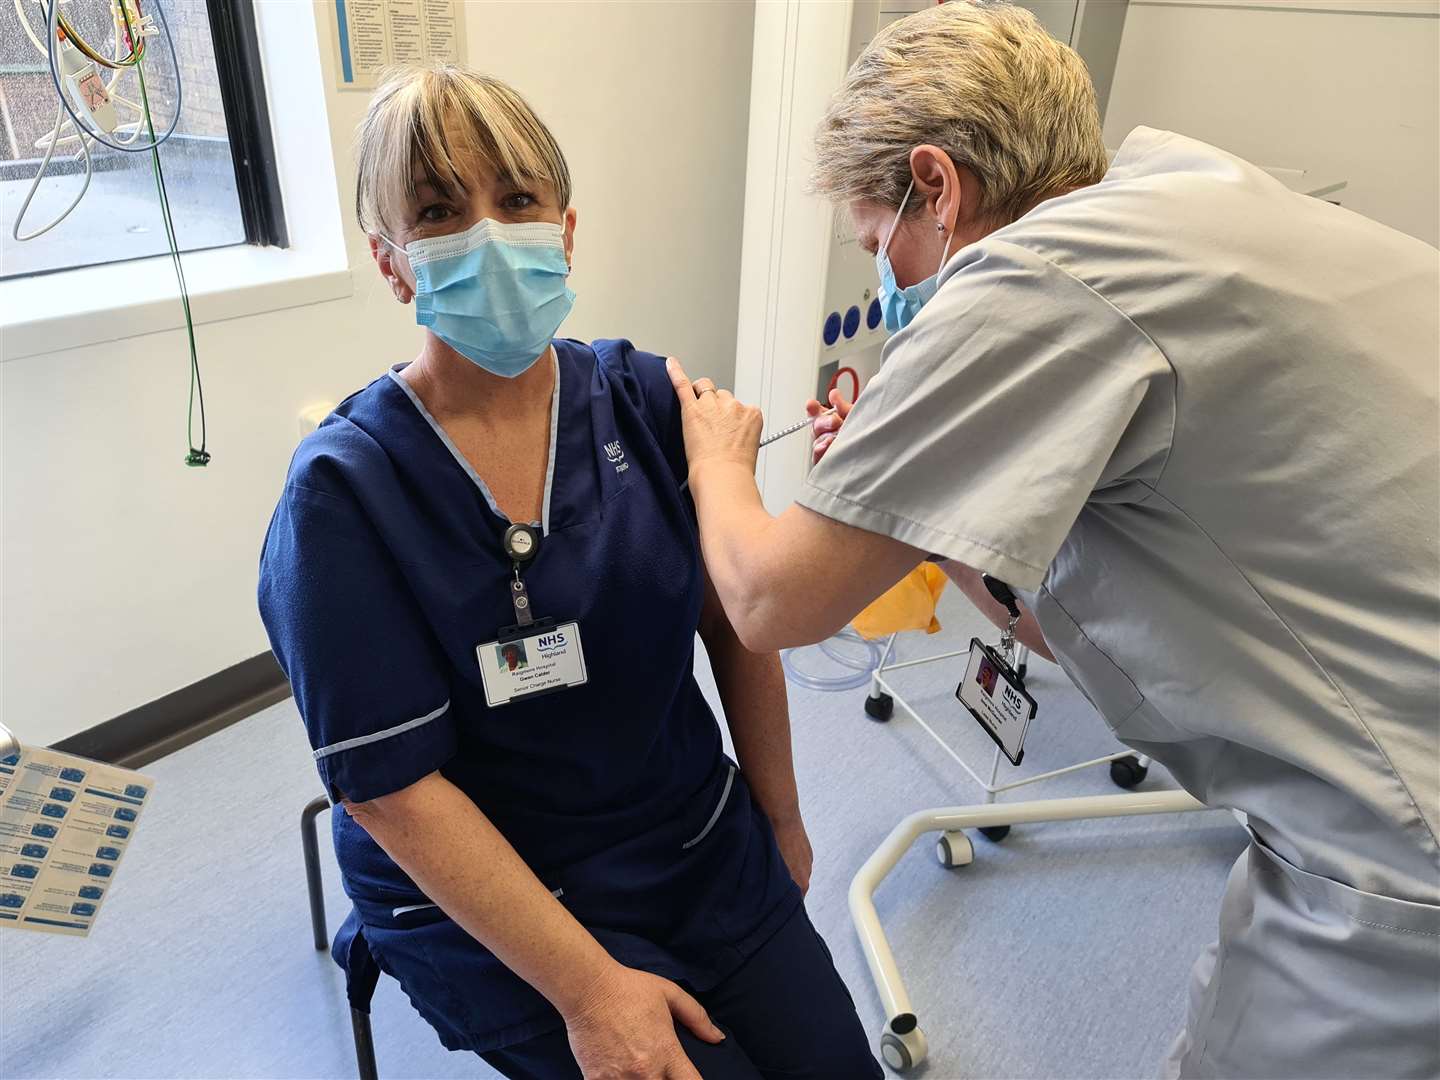 Senior charge nurse Gwen Calder, from critical care at Raigmore Hospital, receiving the vaccination.